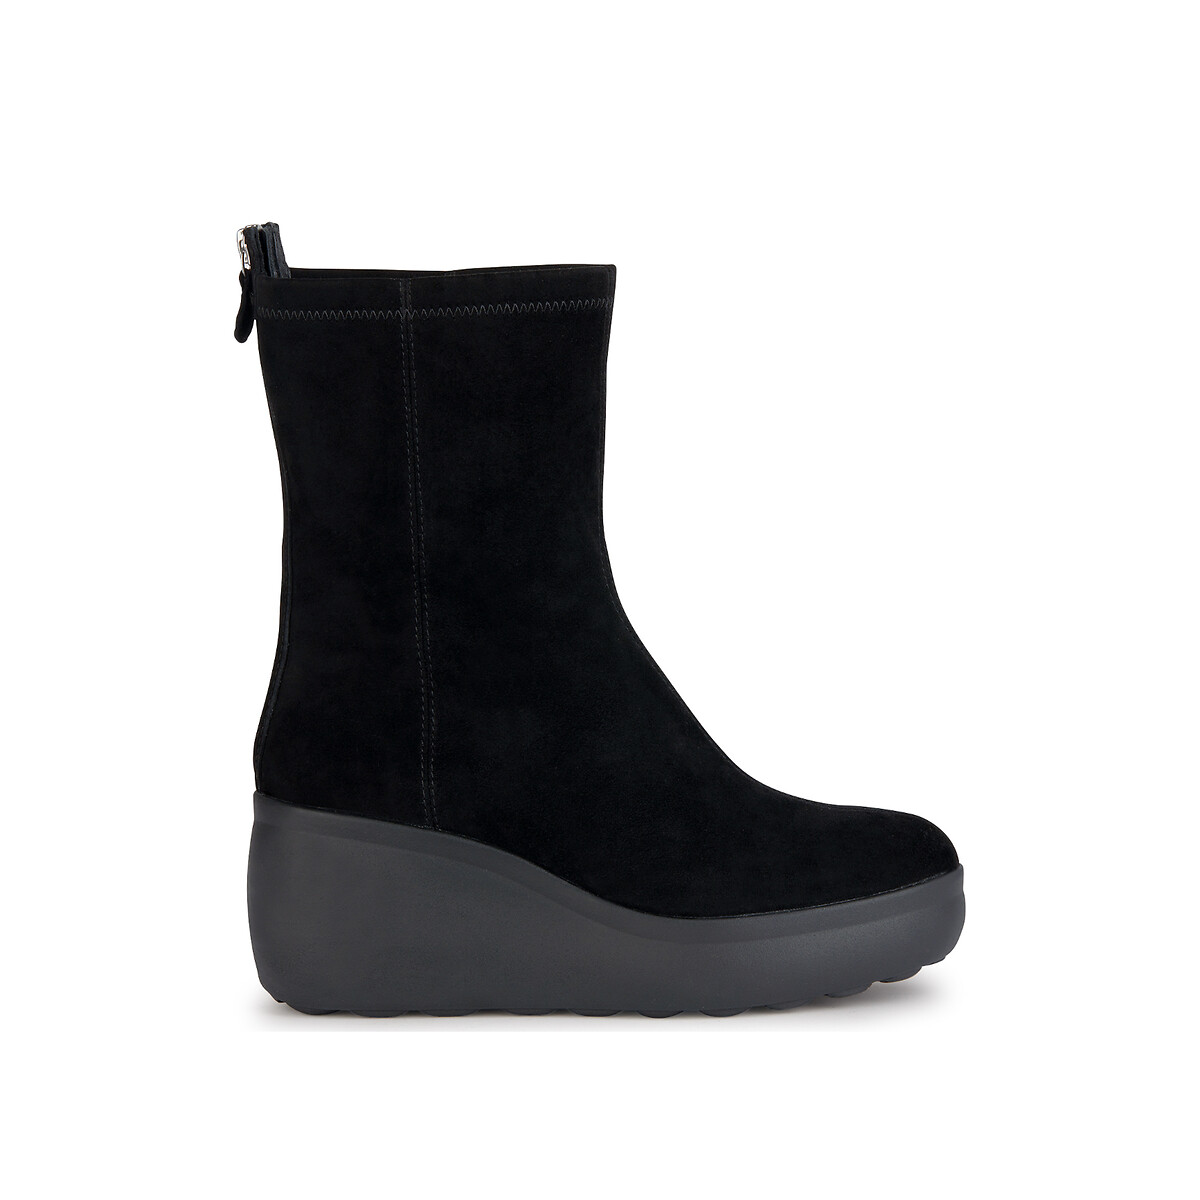 Spherica EC9 Ankle Boots in Breathable Leather with Wedge Heel